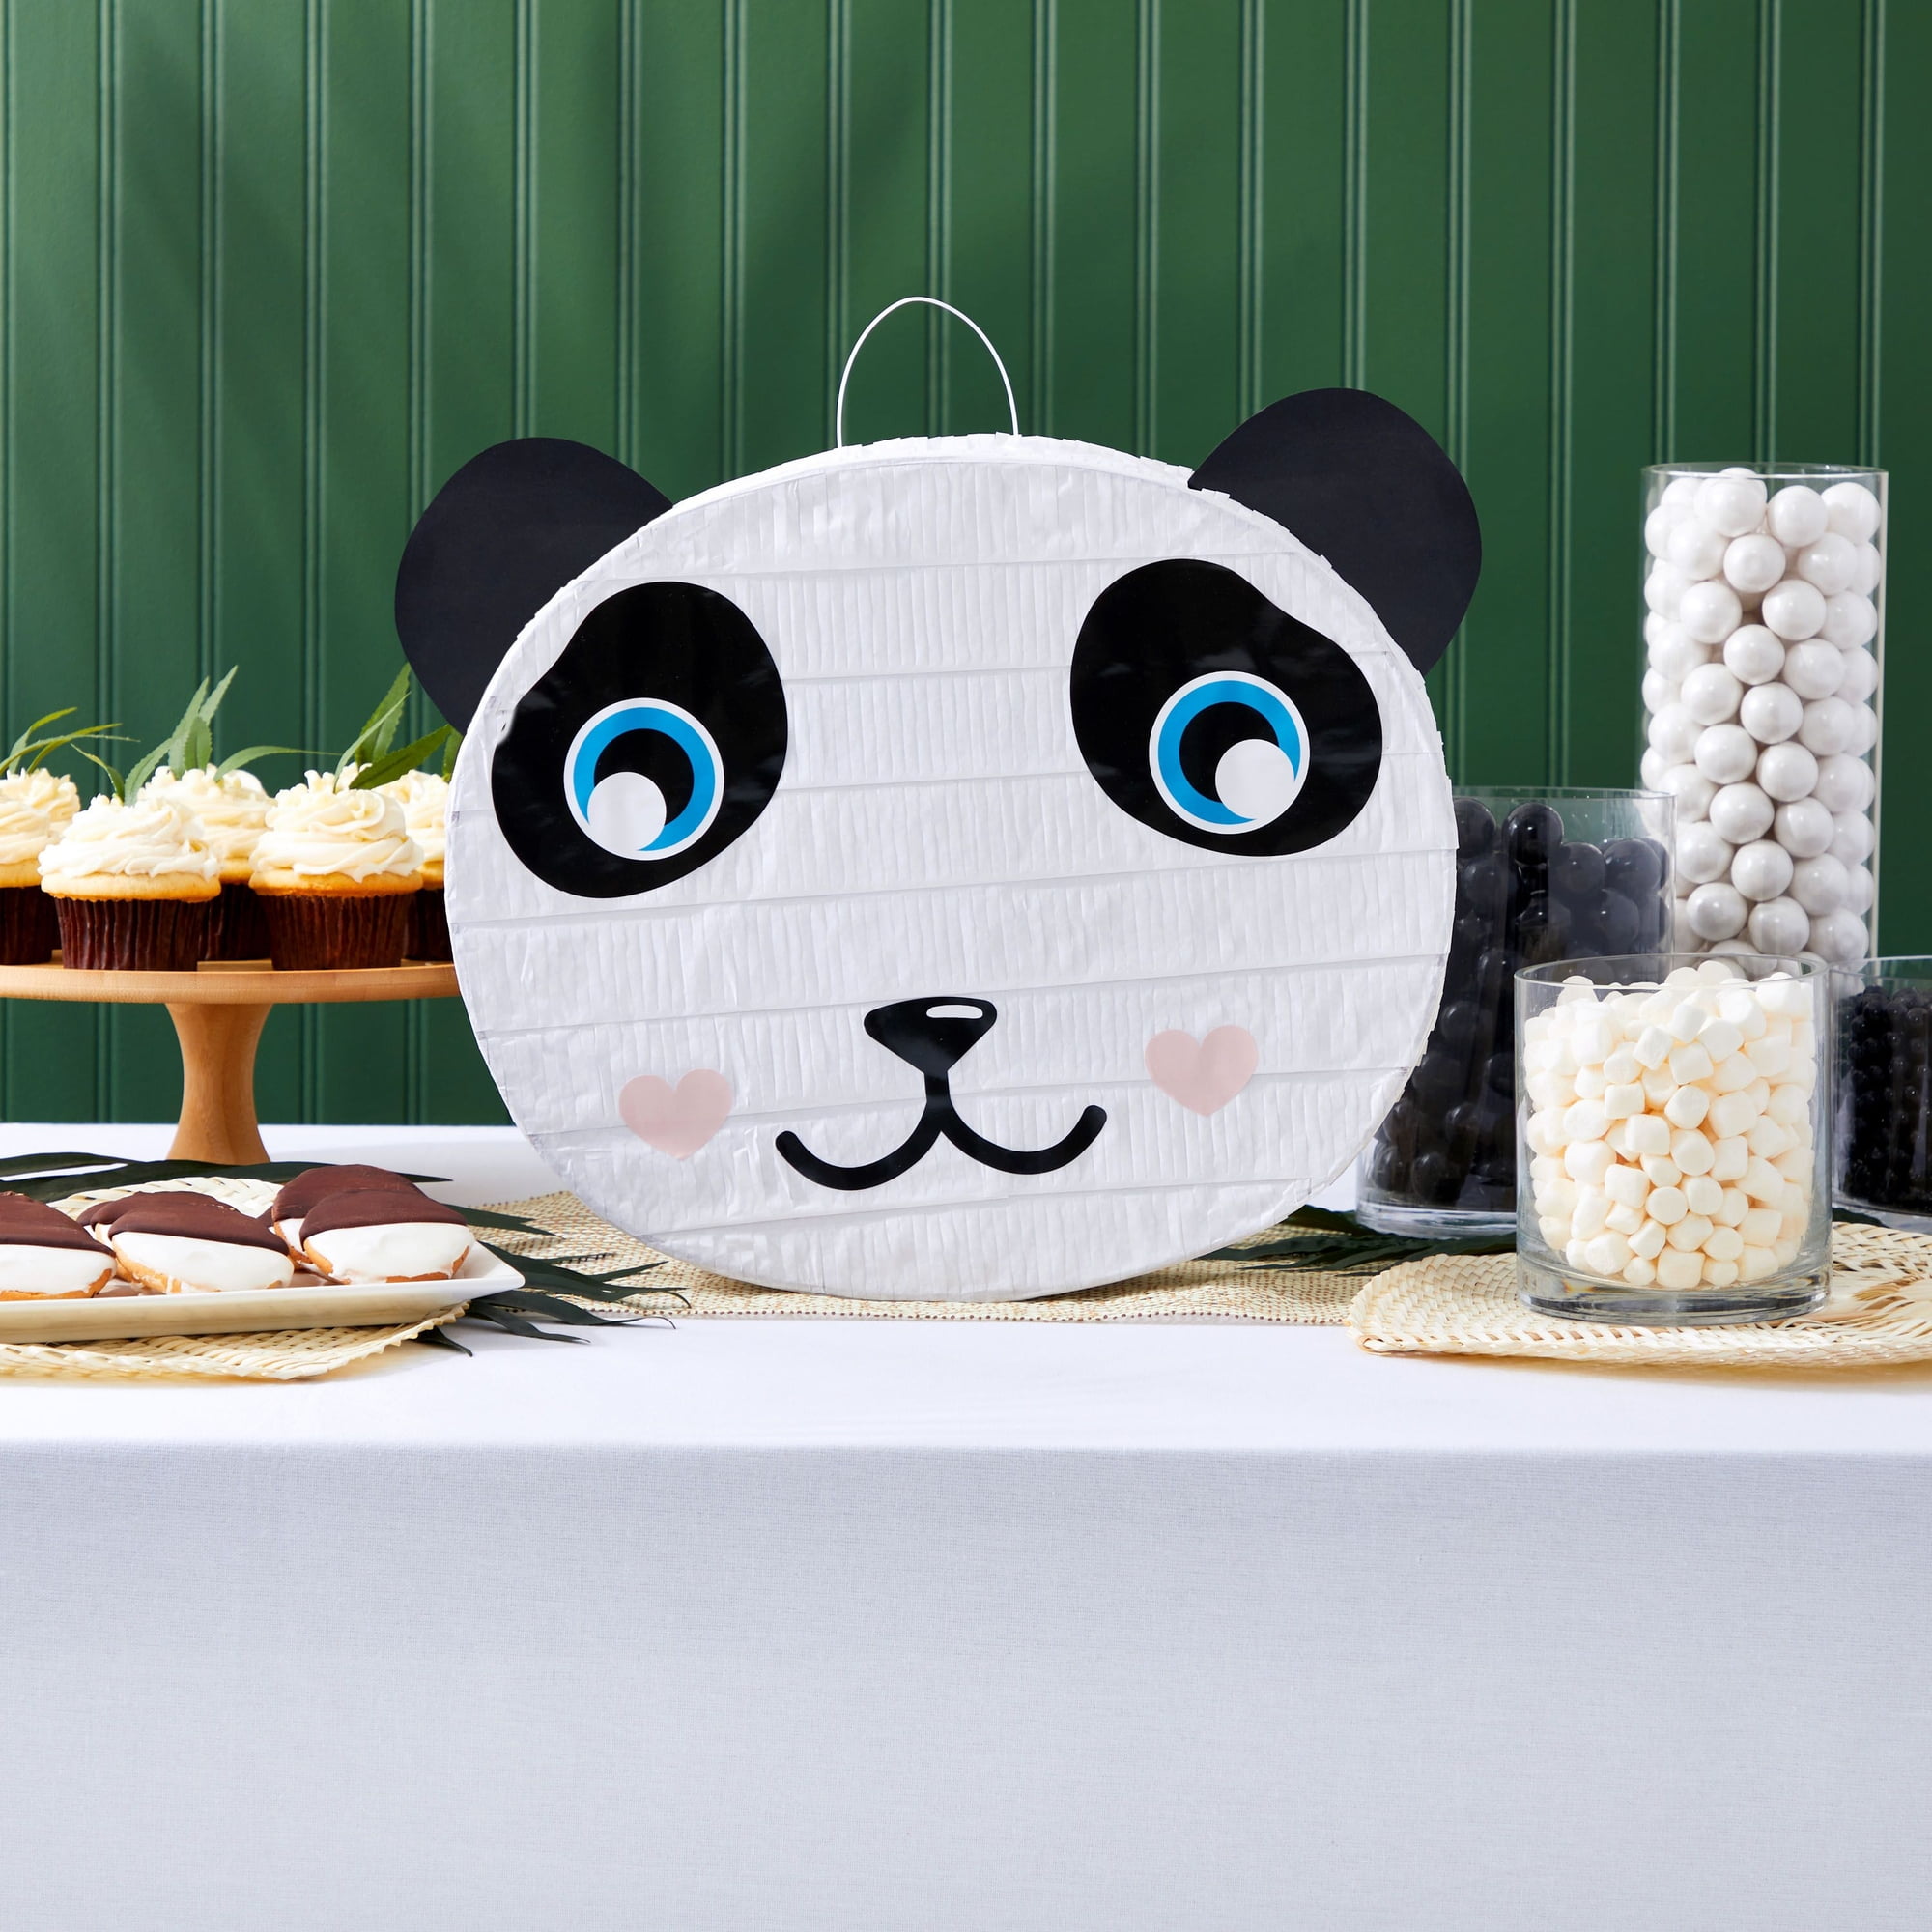  Panda party decorations Panda Birthday Party Supplies for Kids  151 Pcs Panda Disposable Tableware Set your Little One's Birthday Extra  Special with Panda Themed Party Decorations. : Toys & Games